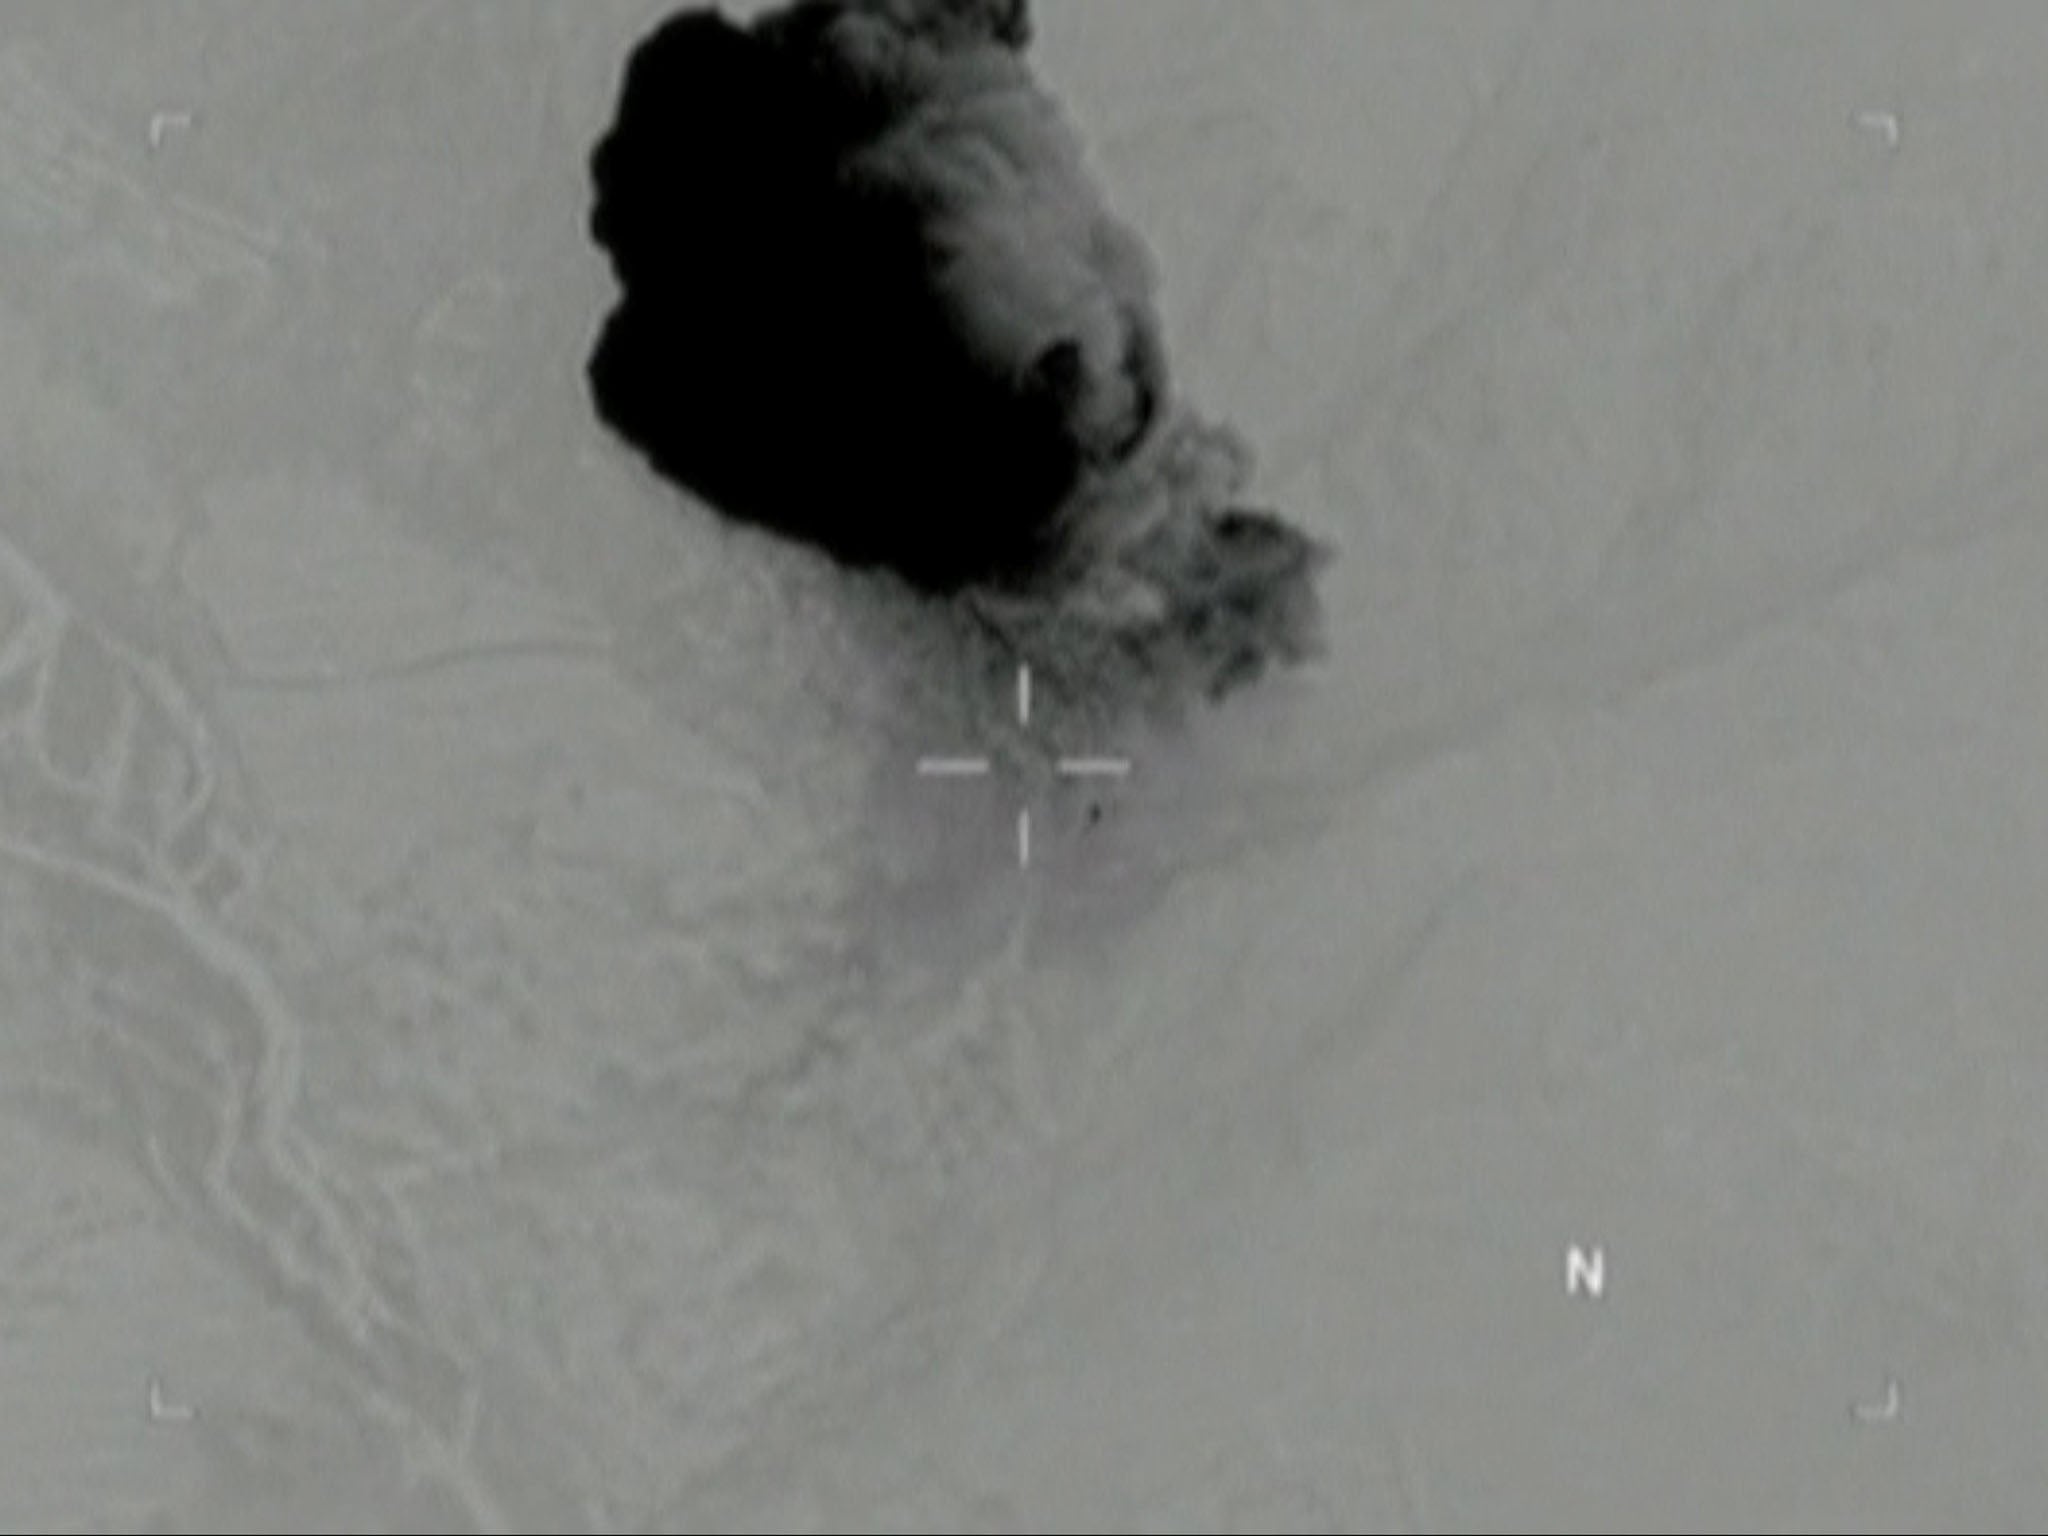 Still image from a video released by the US Department of Defence shows the moment the ‘mother of all bombs’ struck in Nangarhar